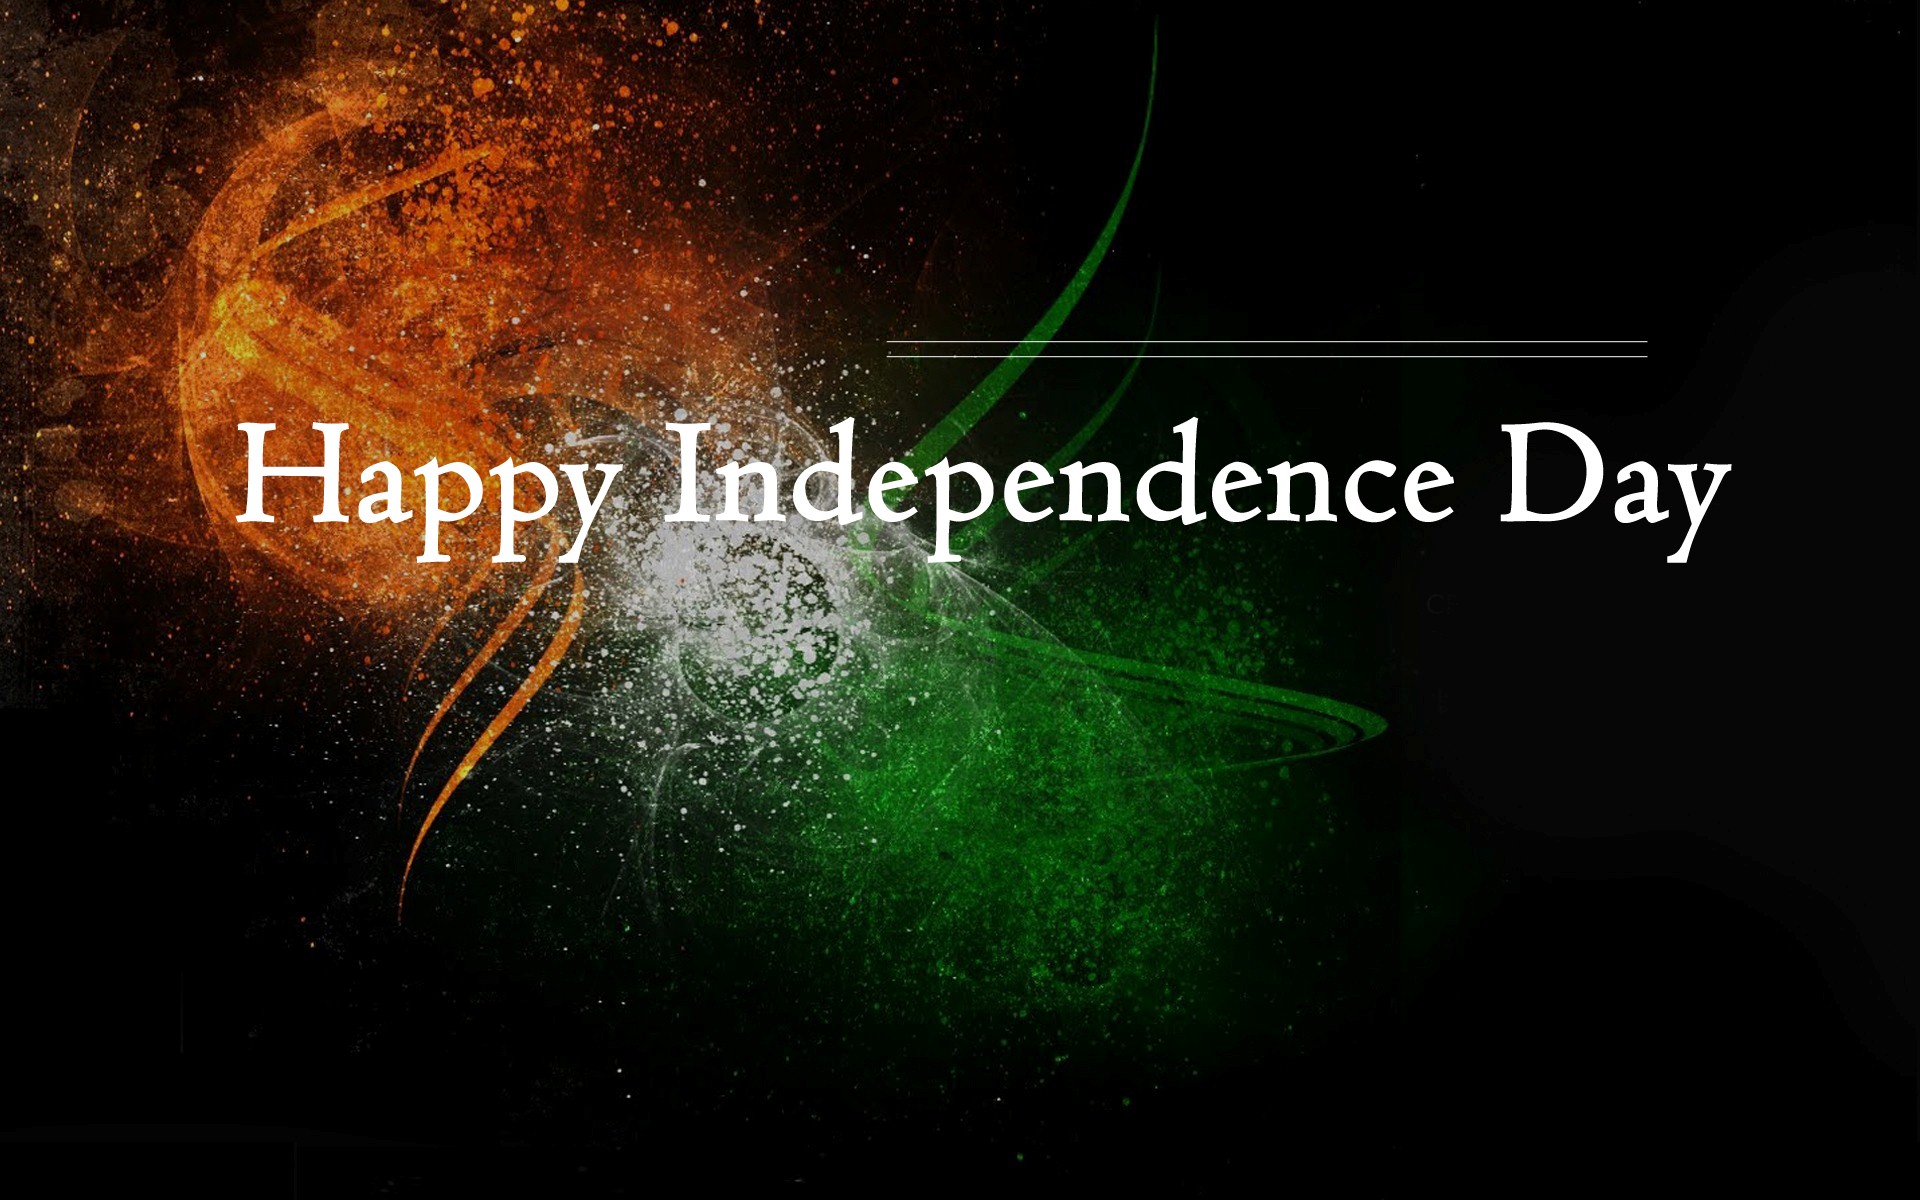 Happy Independence Day Desktop Image Background - Independence Day Of India  - 1920x1200 Wallpaper 